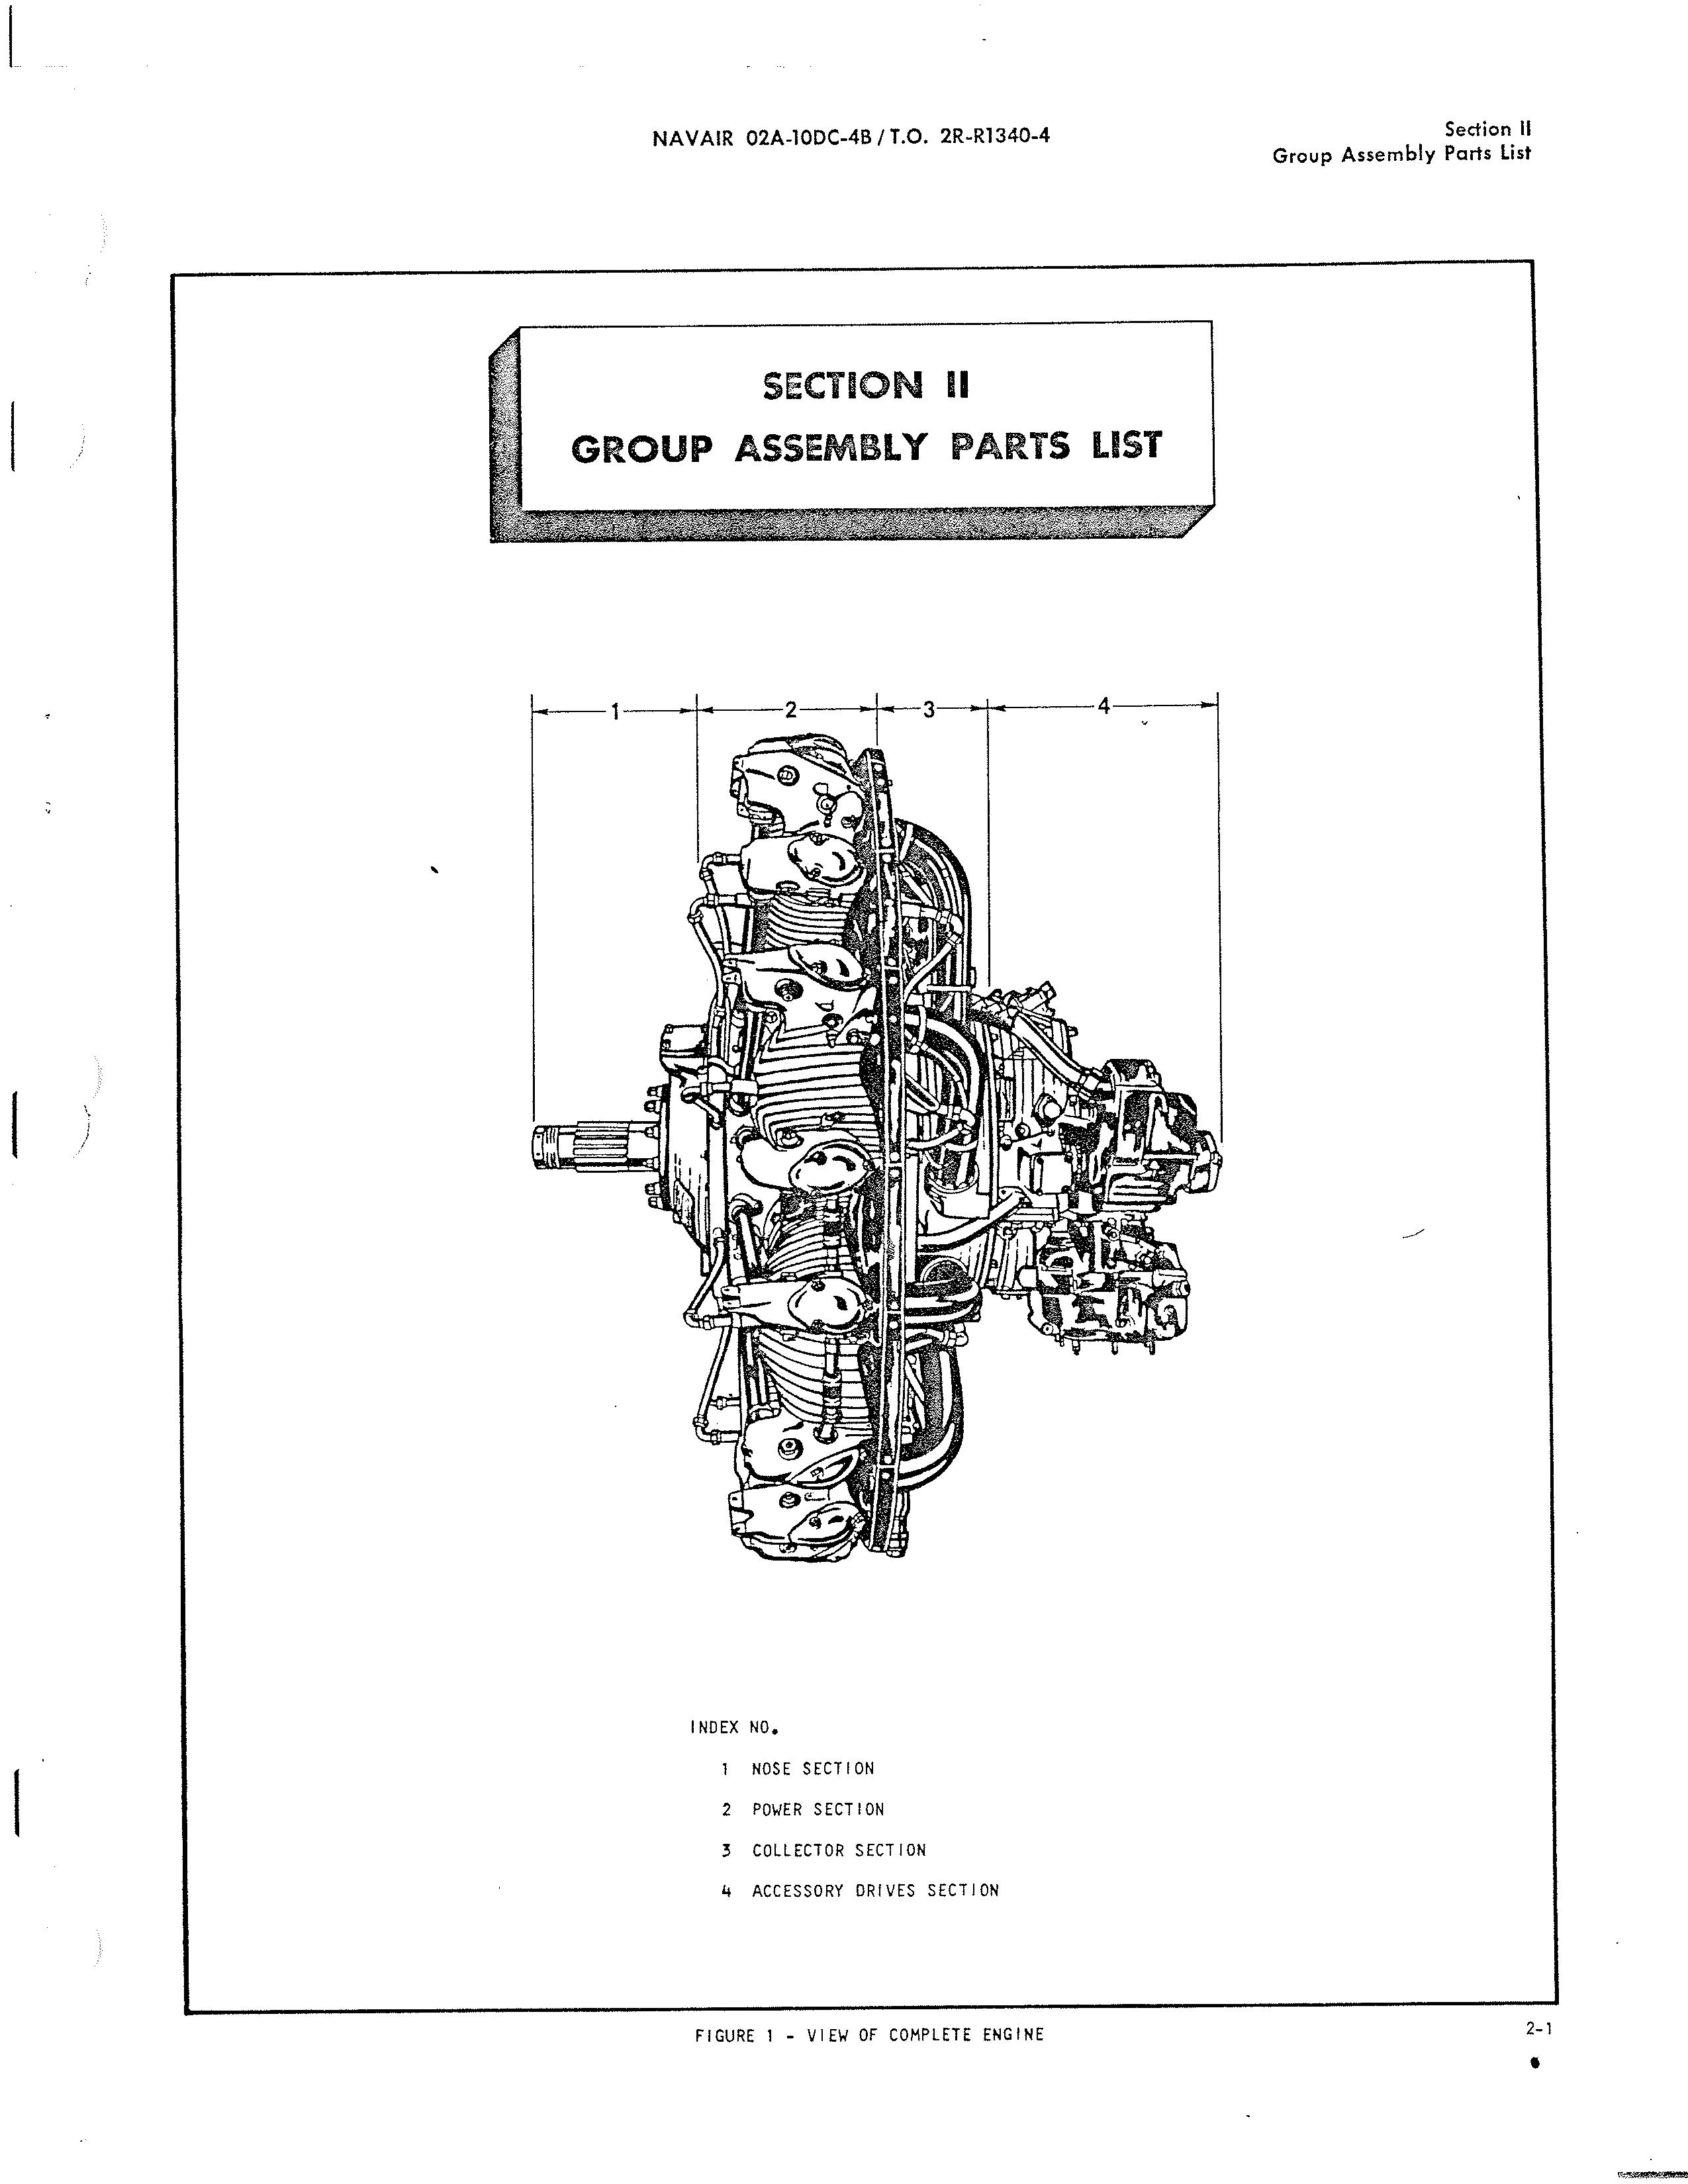 Sample page 13 from AirCorps Library document: Illustrated Parts Breakdown for R1340-AN-1, -45, -48A, -52, and -57 Engines